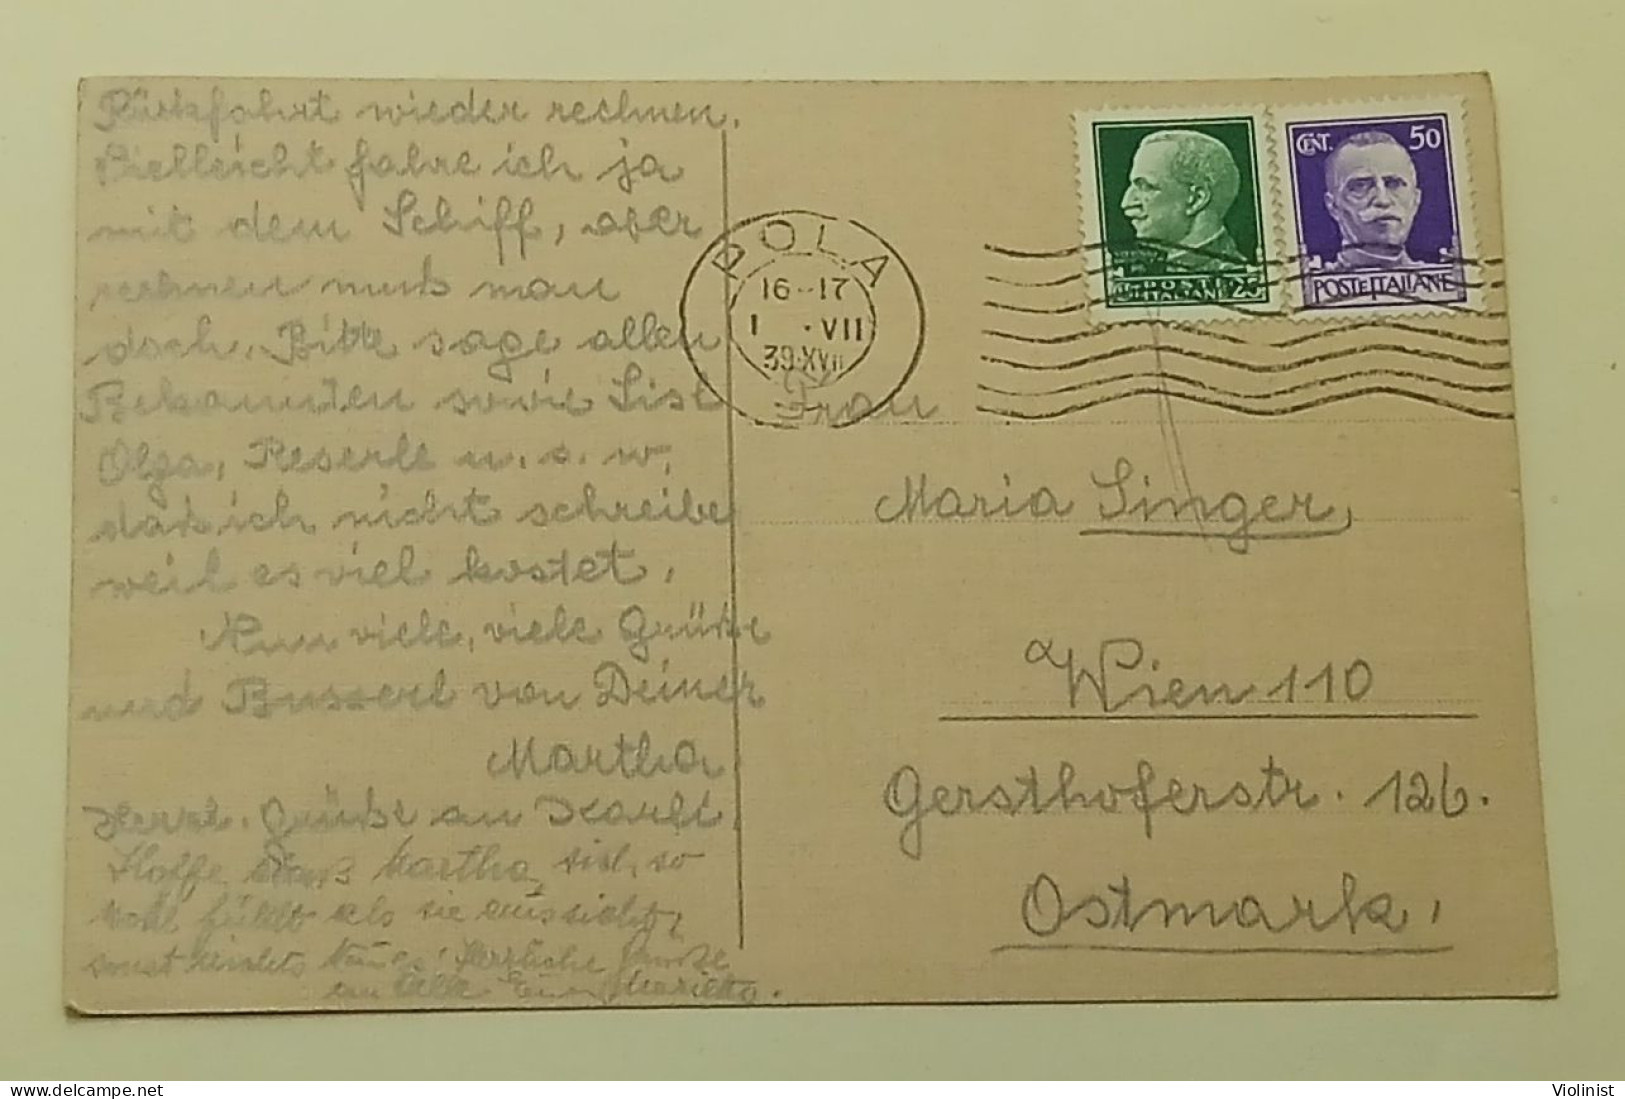 Italian Post - Stationery Sent From Pula To Vienna - Postmark POLA 1939. - Stamped Stationery